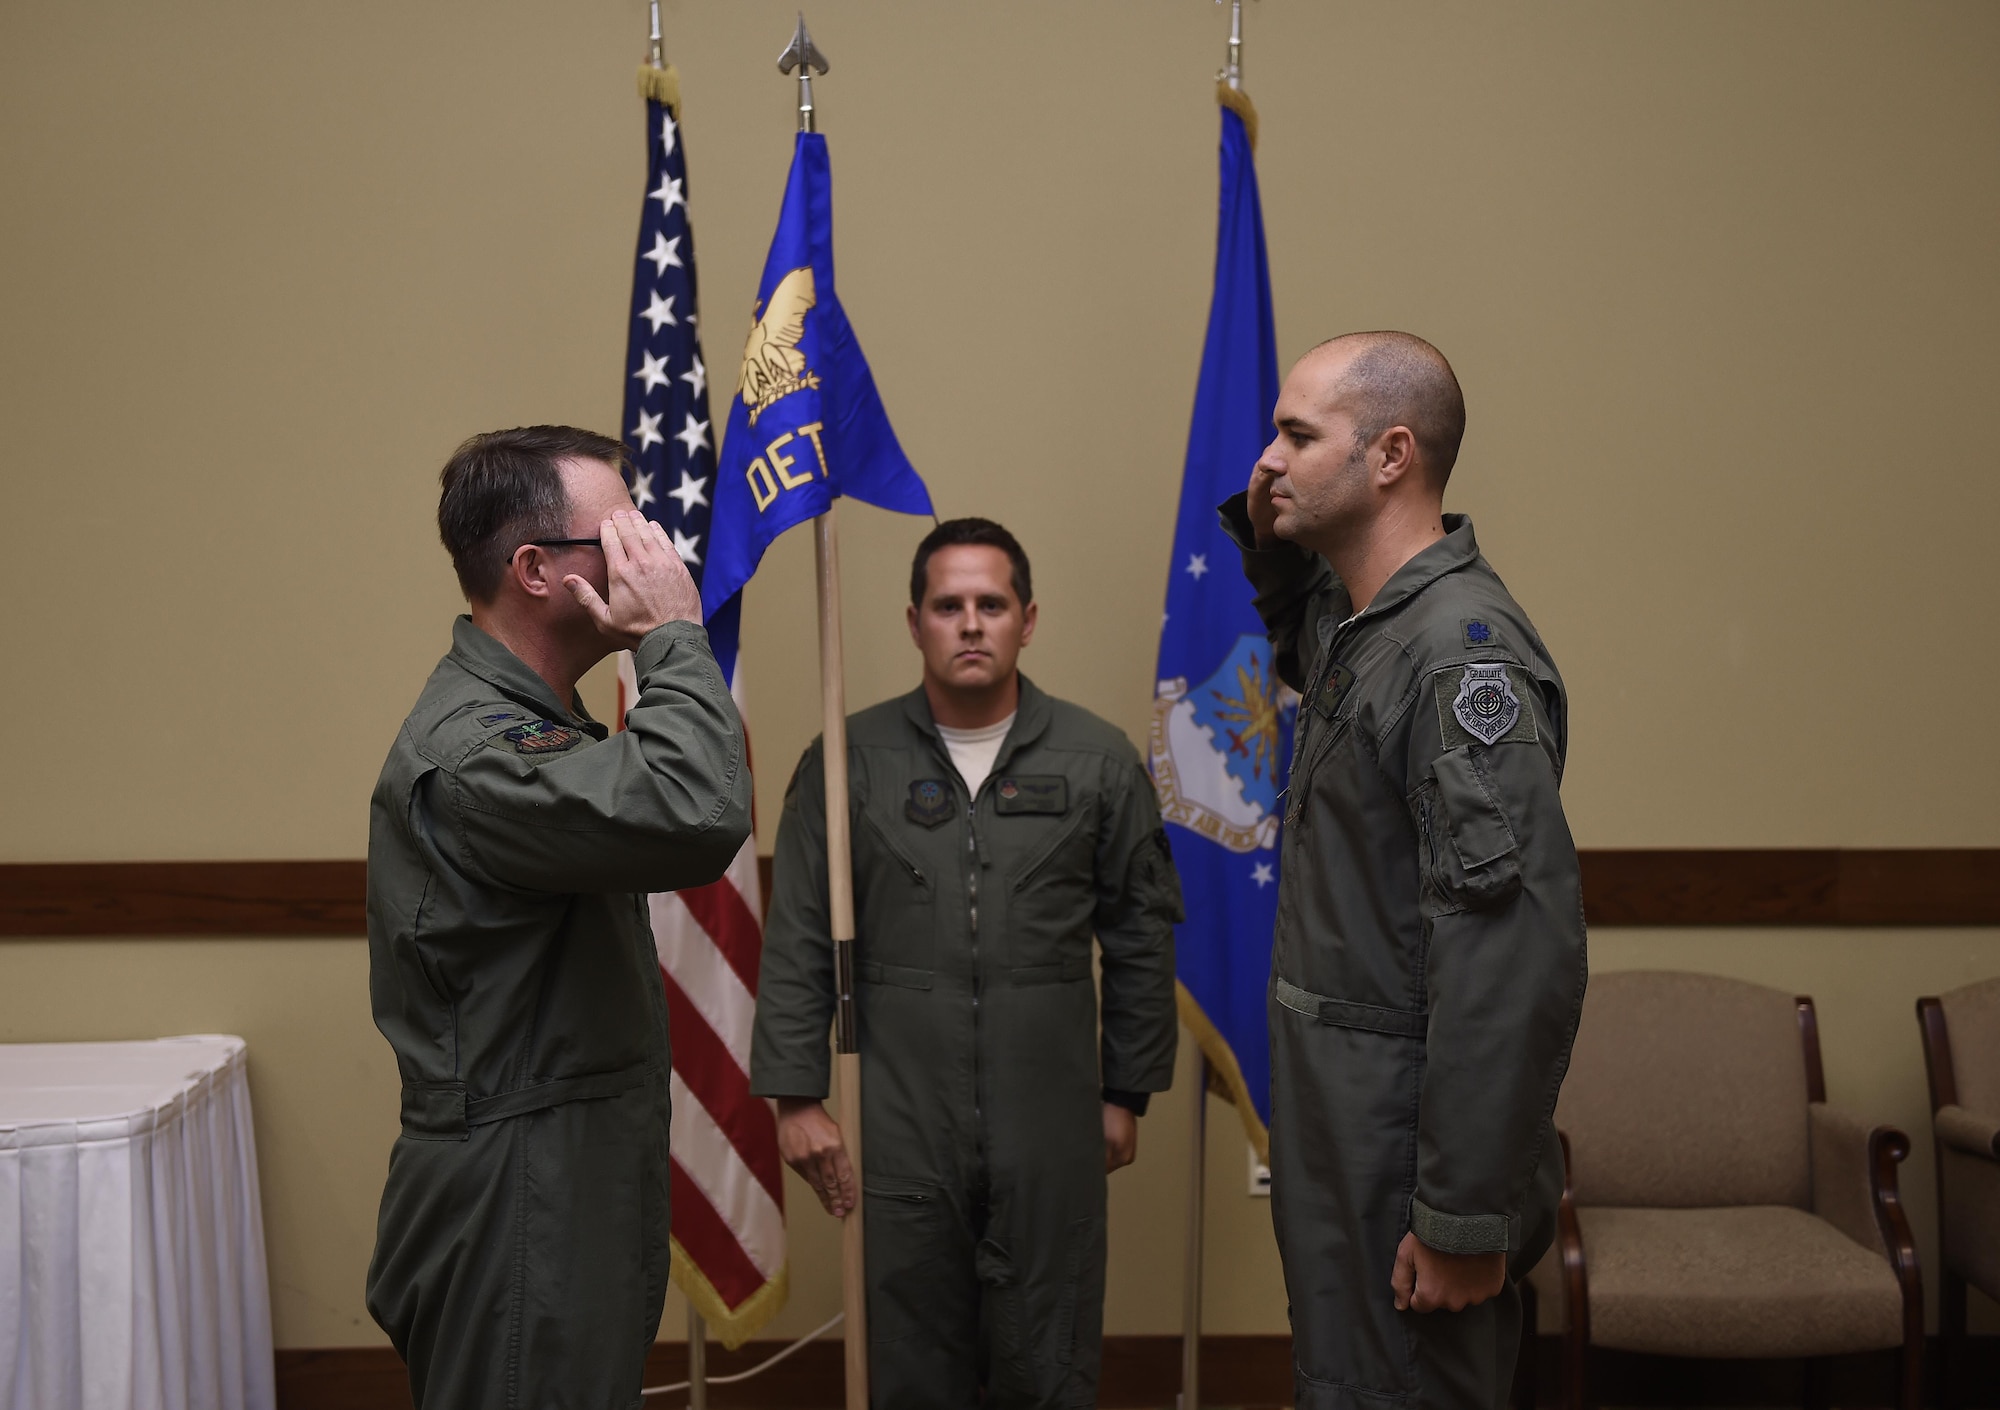 Col. Stewart Hammons, 1st Special Operations Group commander, salutes the new commander of Detachment 2, Lt. Col. Bret DeAngelis, during an activation ceremony at Hurlburt Field, Fla., July 10, 2015. DET 2 was activated to operationally test the AC-130J Ghostrider gunship, train aircrews, as well as develop new tactics, techniques and procedures for the aircraft. (U.S. Air Force photos by Airman Kai White/Released)